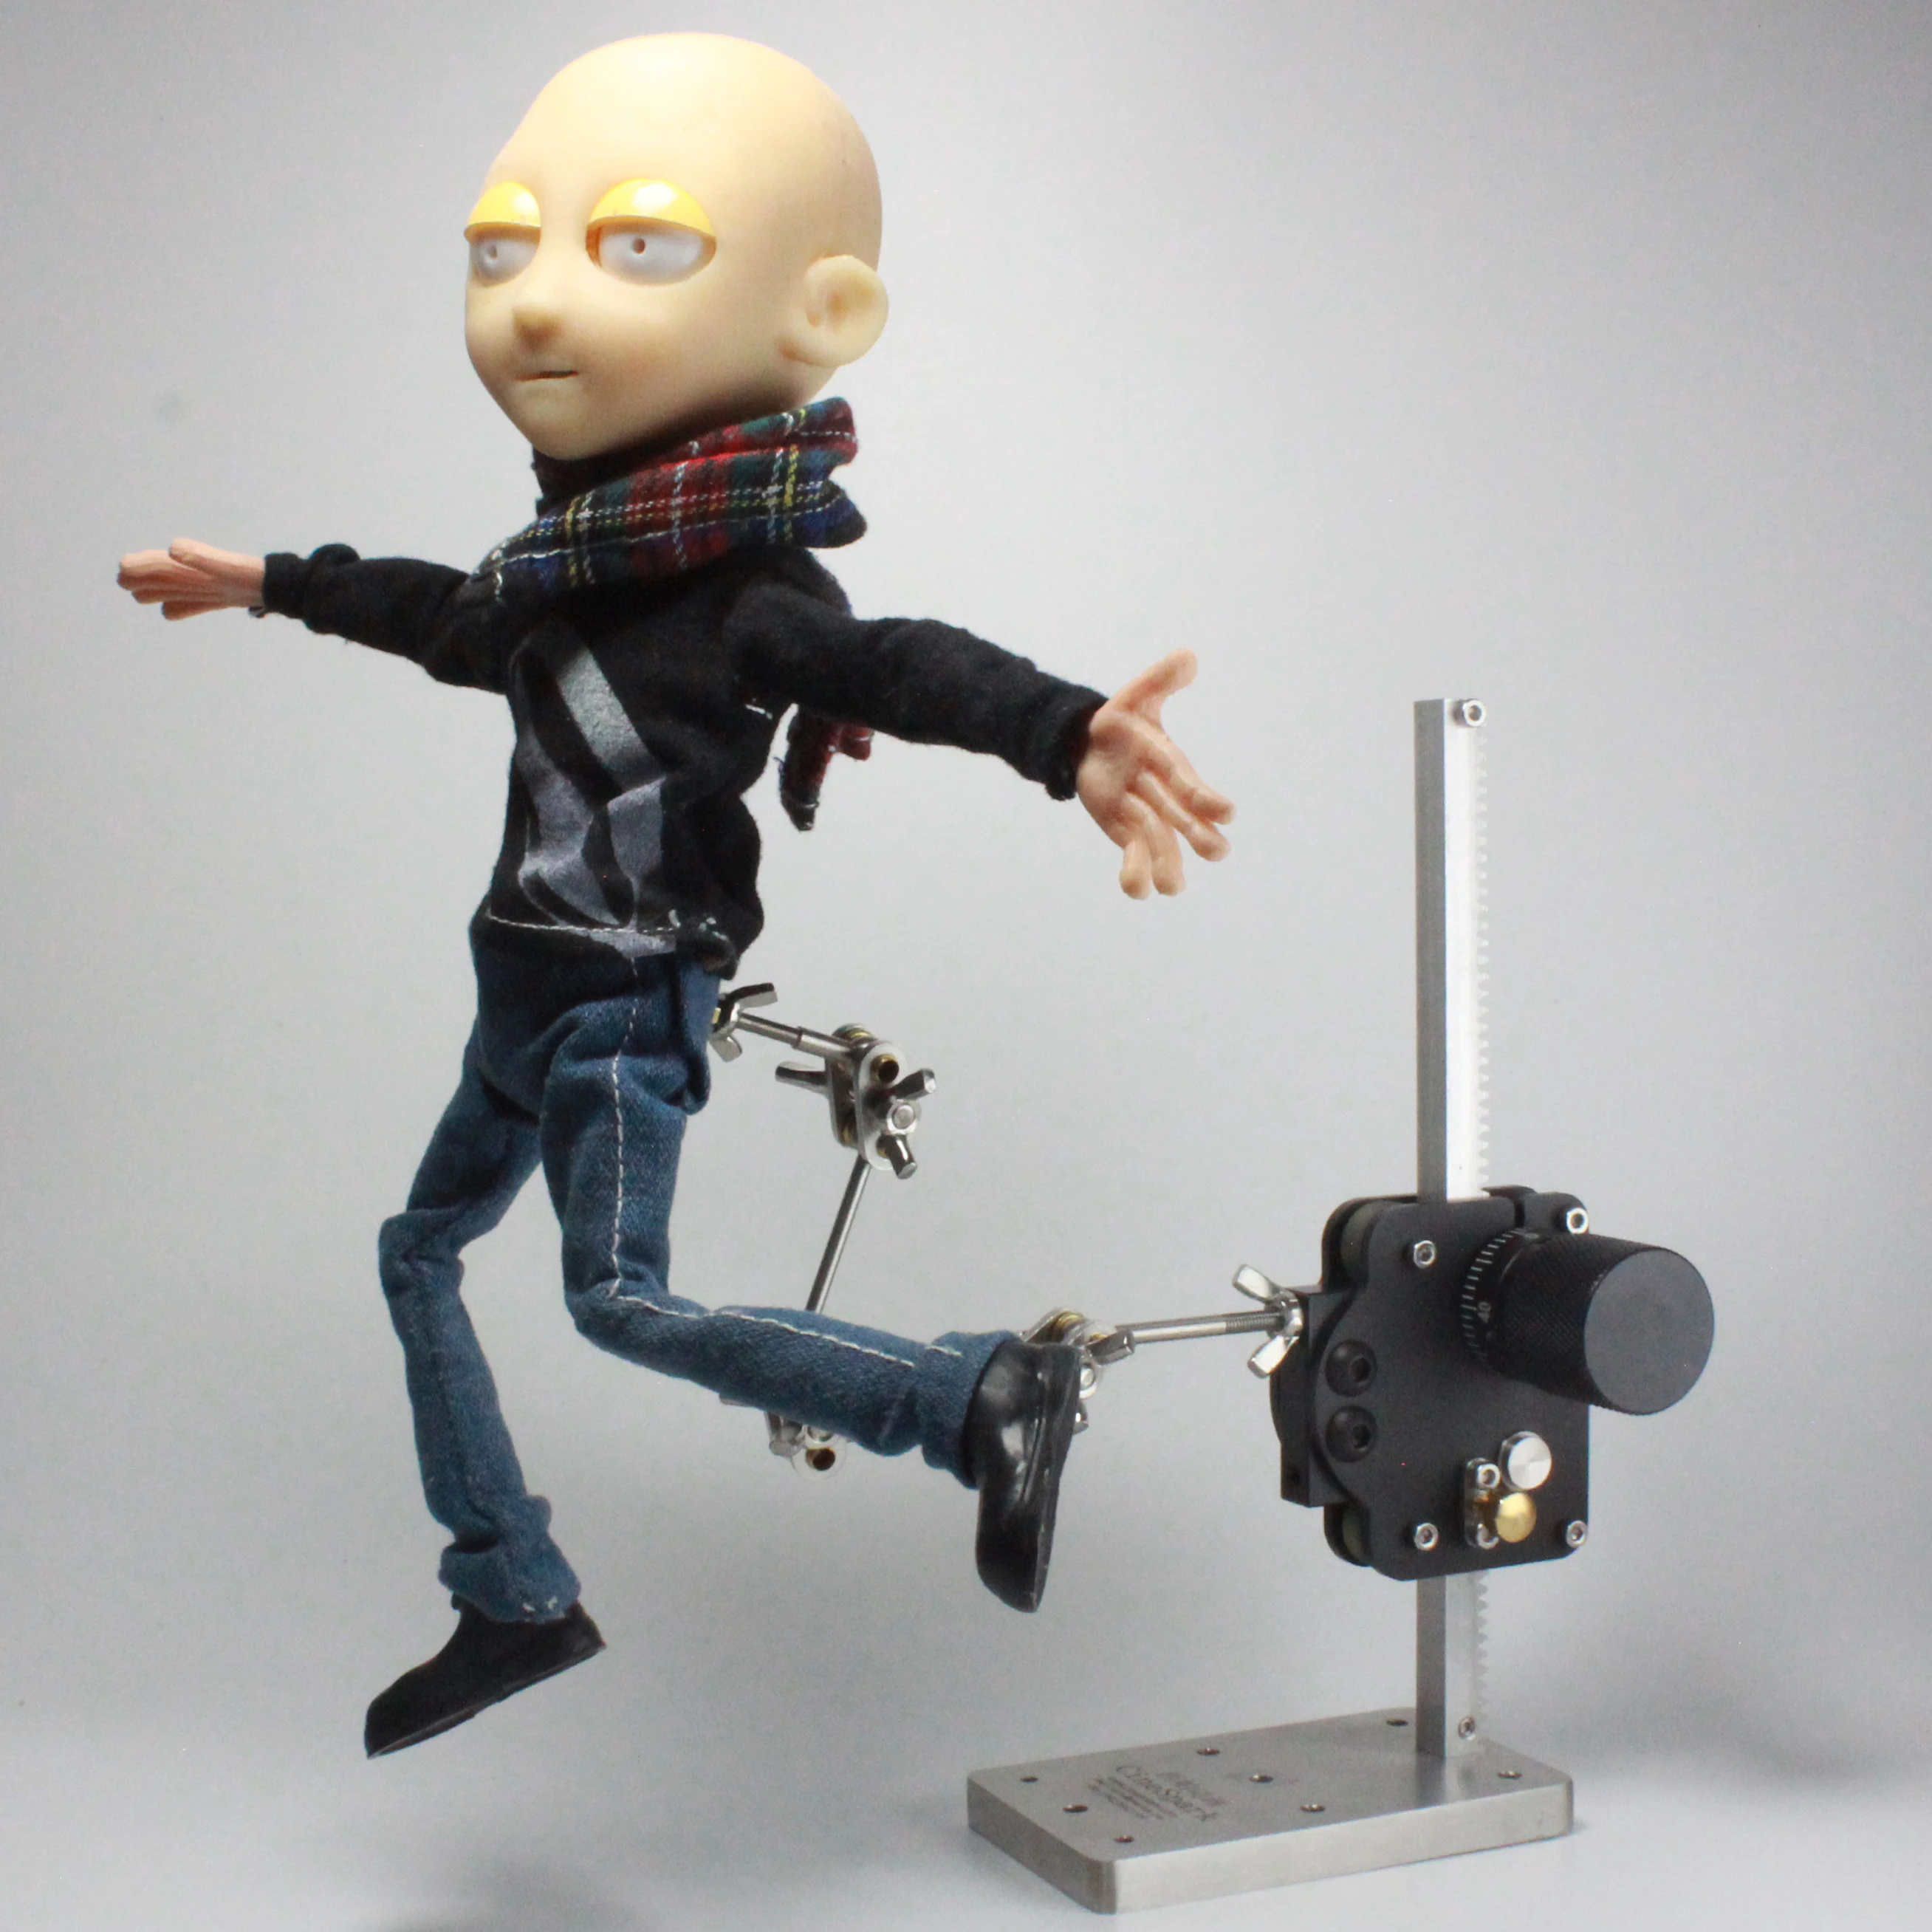 Stop Motion Animation Equipment | Stop Motion Animation Studios - Wr-200 Rig  System - Aliexpress